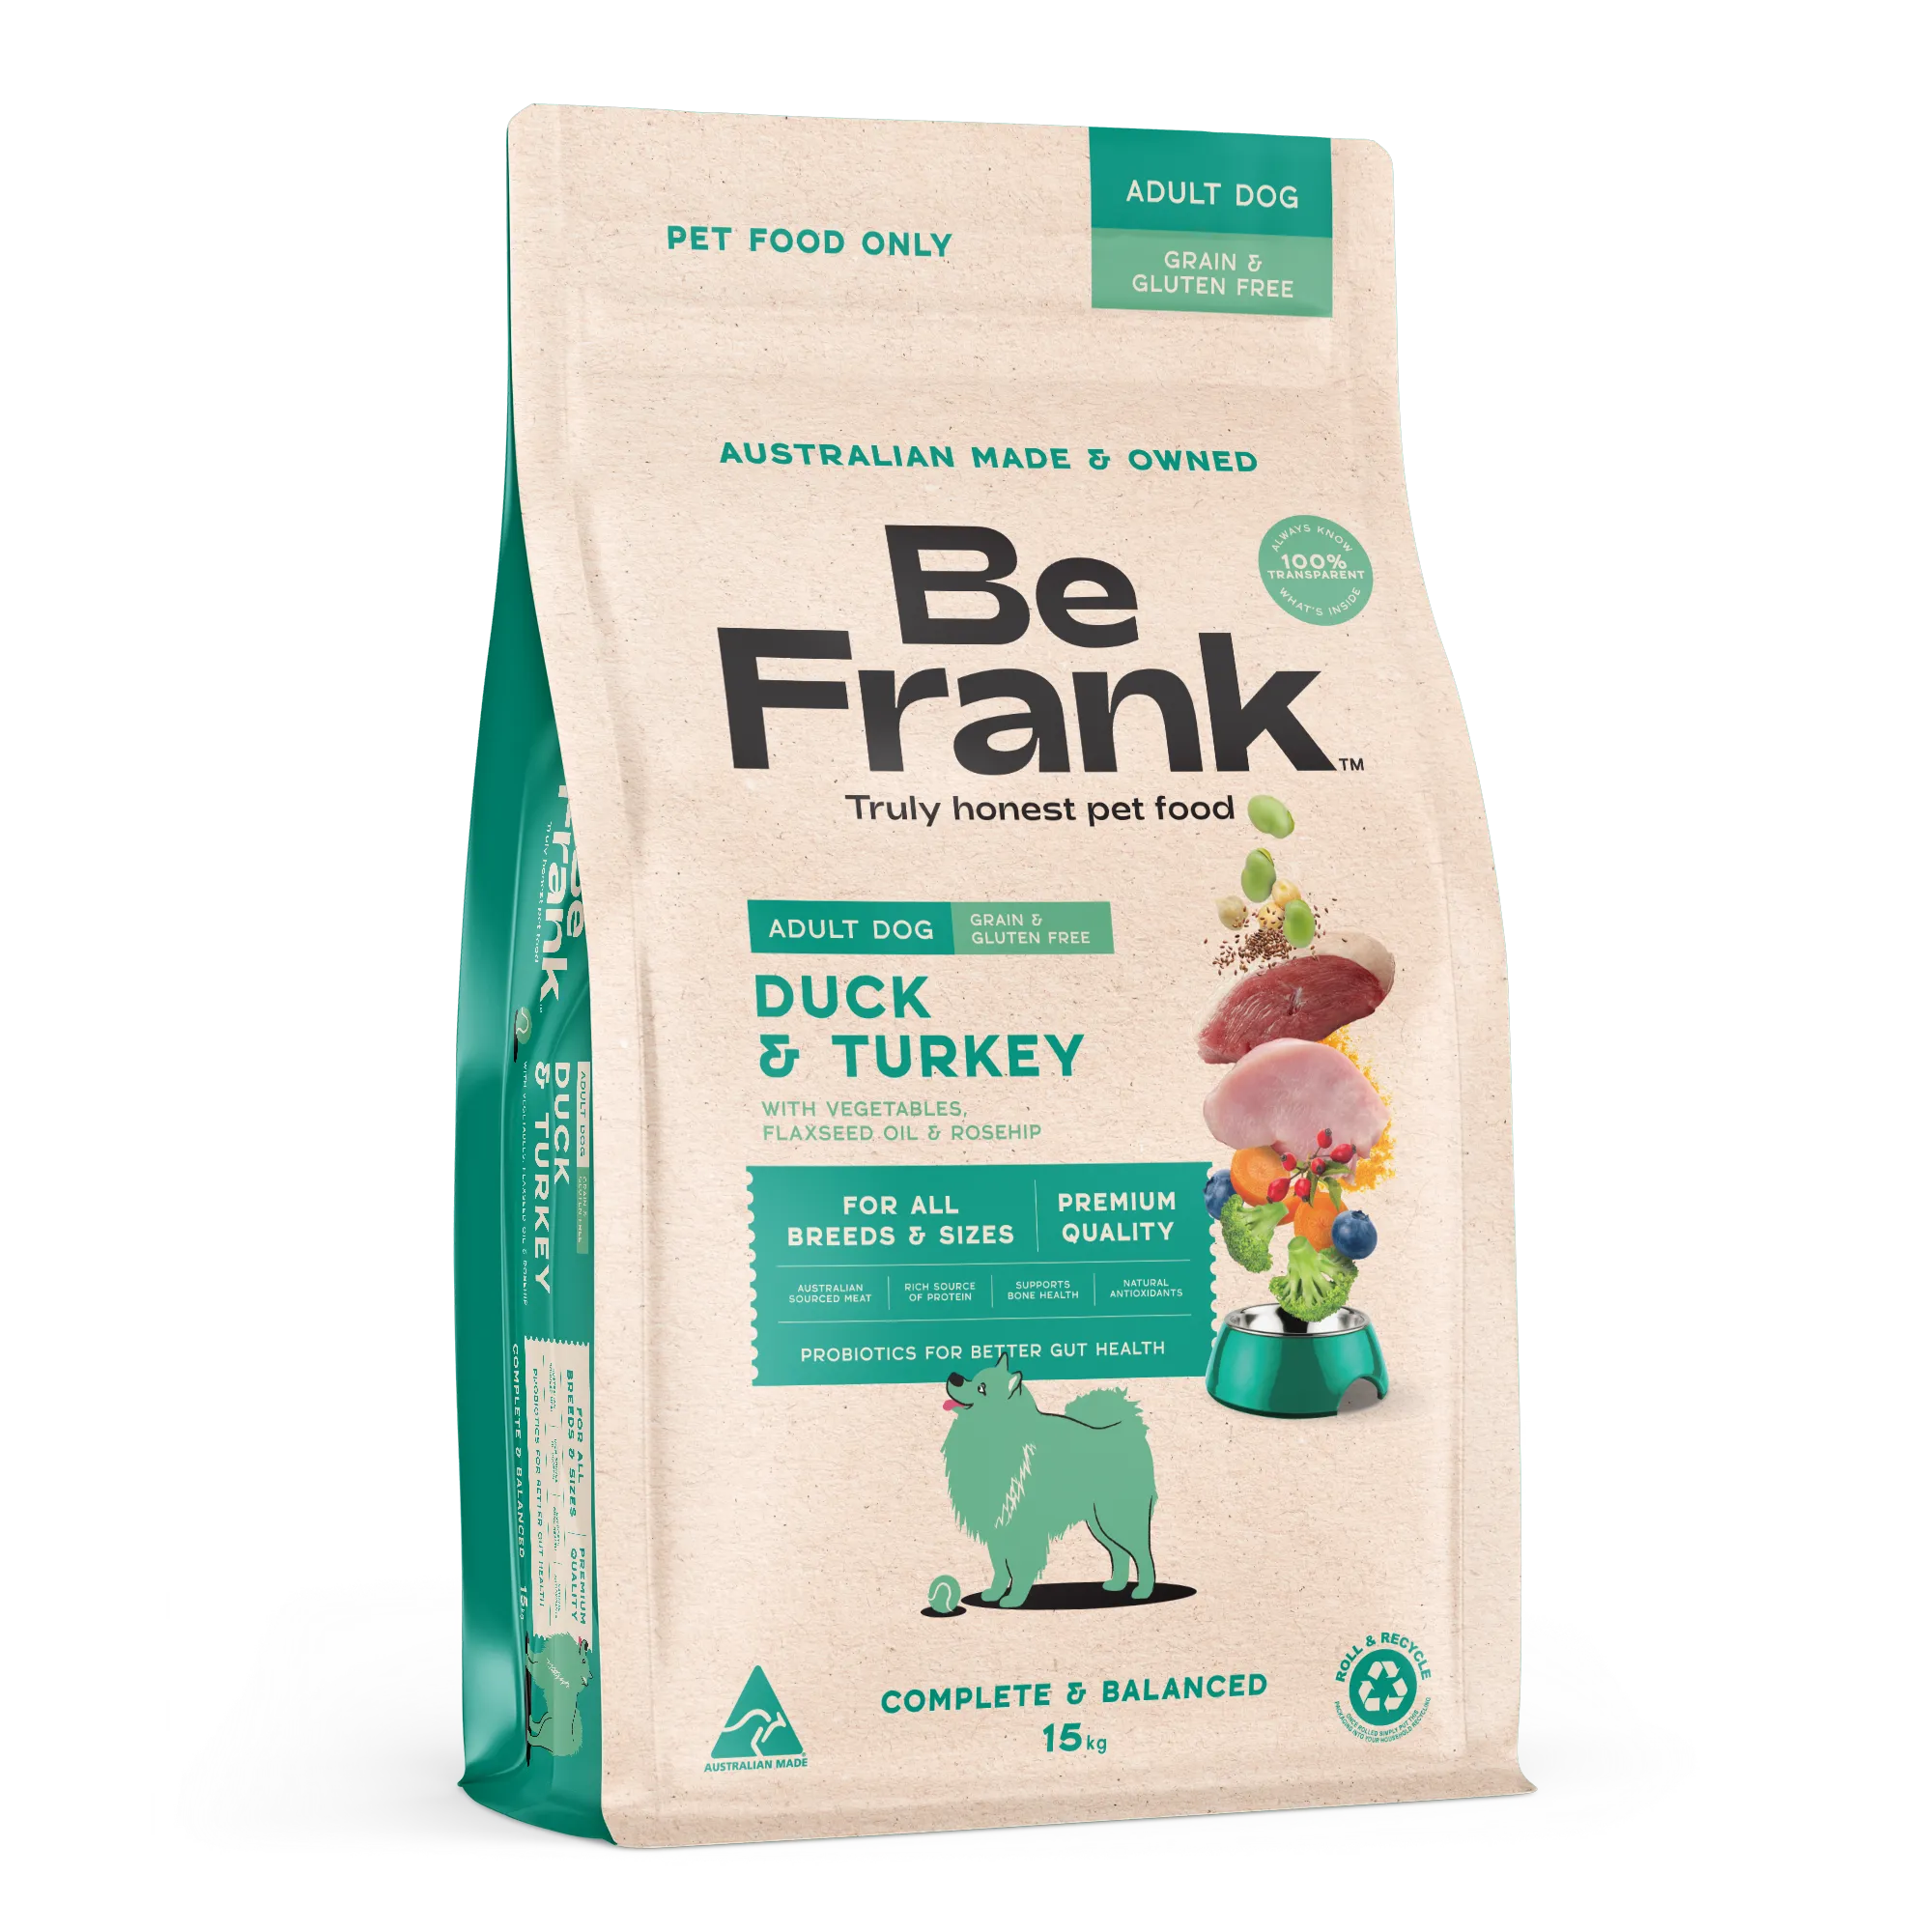 Be Frank Dog Food Review